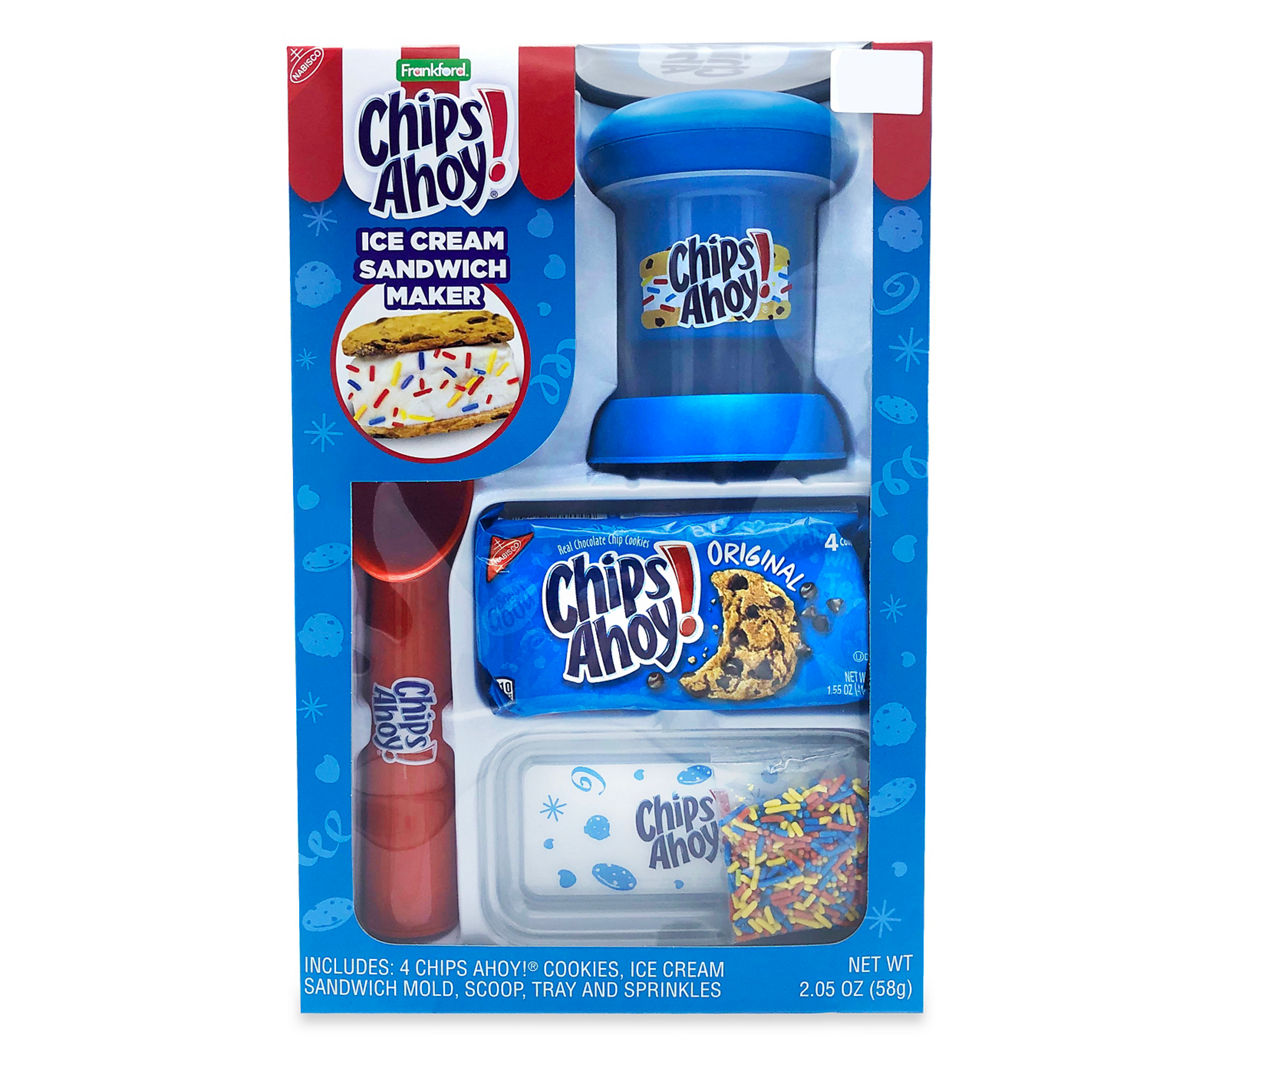 Chips Deluxe Chips Ahoy Ice Cream Sandwich Maker